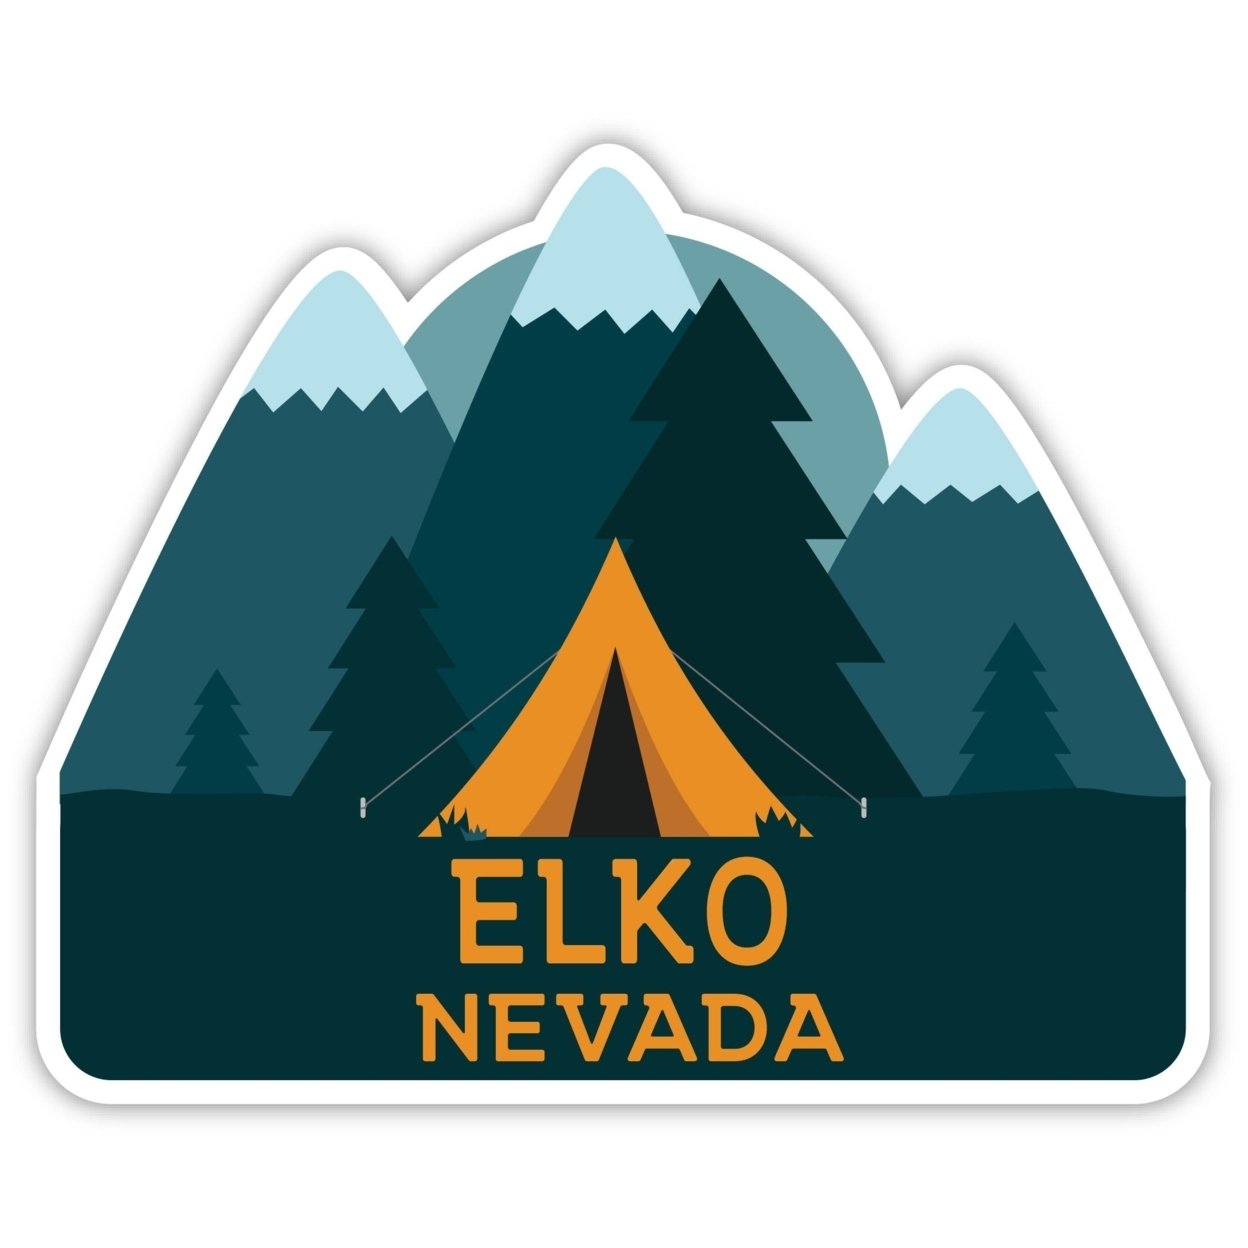 Elko Nevada Souvenir Decorative Stickers (Choose Theme And Size) - 4-Pack, 4-Inch, Tent